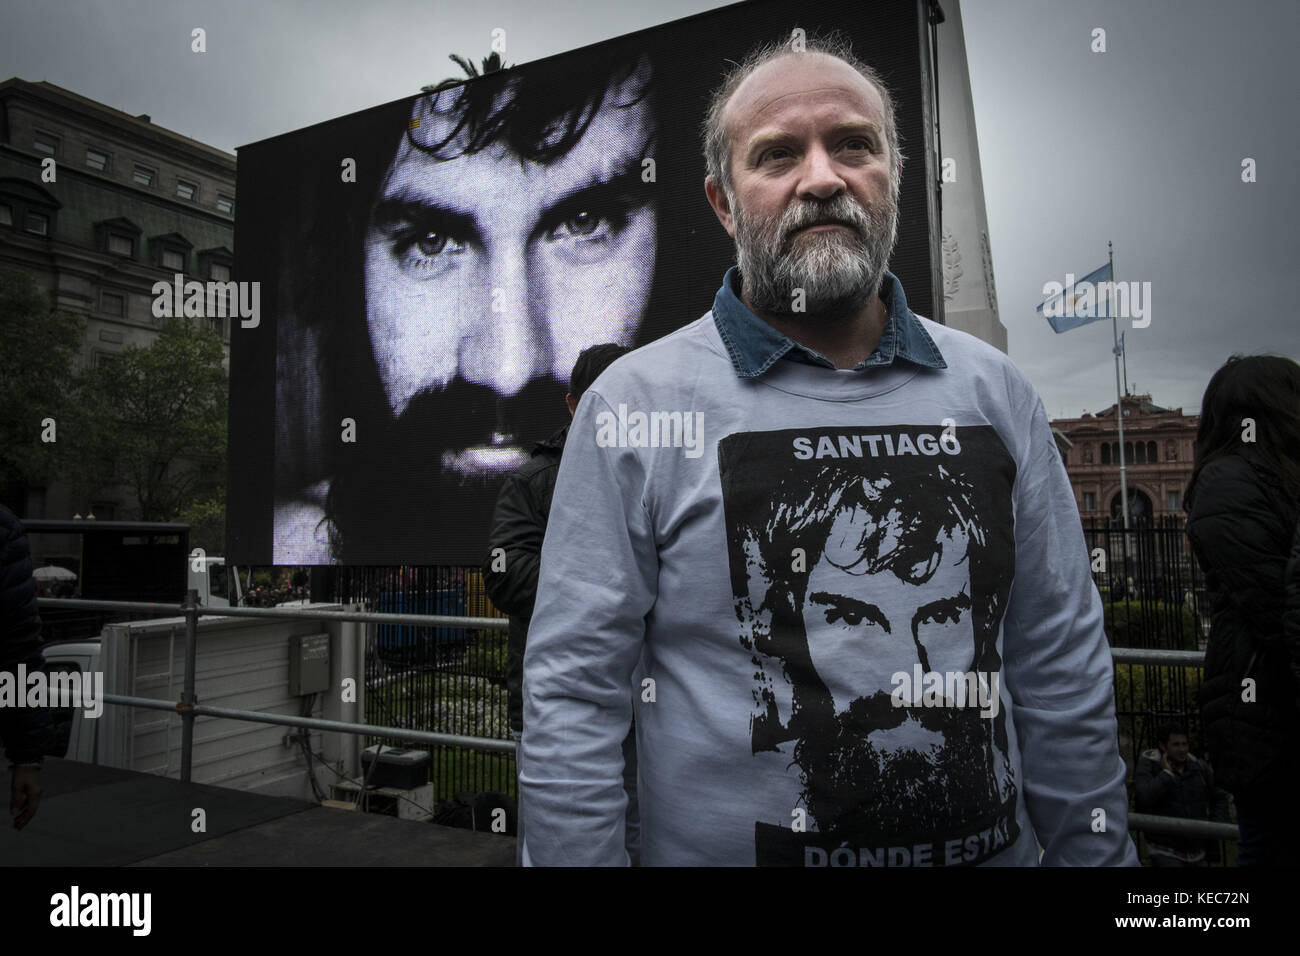 Federal Capital, Buenos Aires, Argentina. 16th Sep, 2017. A demonstrator is seen gathering to protest against the disappearance of Santiago Maldonado since 1 August 2017 while wearing a clothes with the photo of Santiago Maldonado.Despite the rain, thousands of protesters gathered on Sunday in Plaza de Mayo hosted by the relatives and friends of Santiago Maldonado two months after his disappearance, after he was reportedly surrendering to Argentinian police guards during a raid on a camp of Mapuche protesters in Patagonia, south of Argentina. Various protests were seen in several other Stock Photo